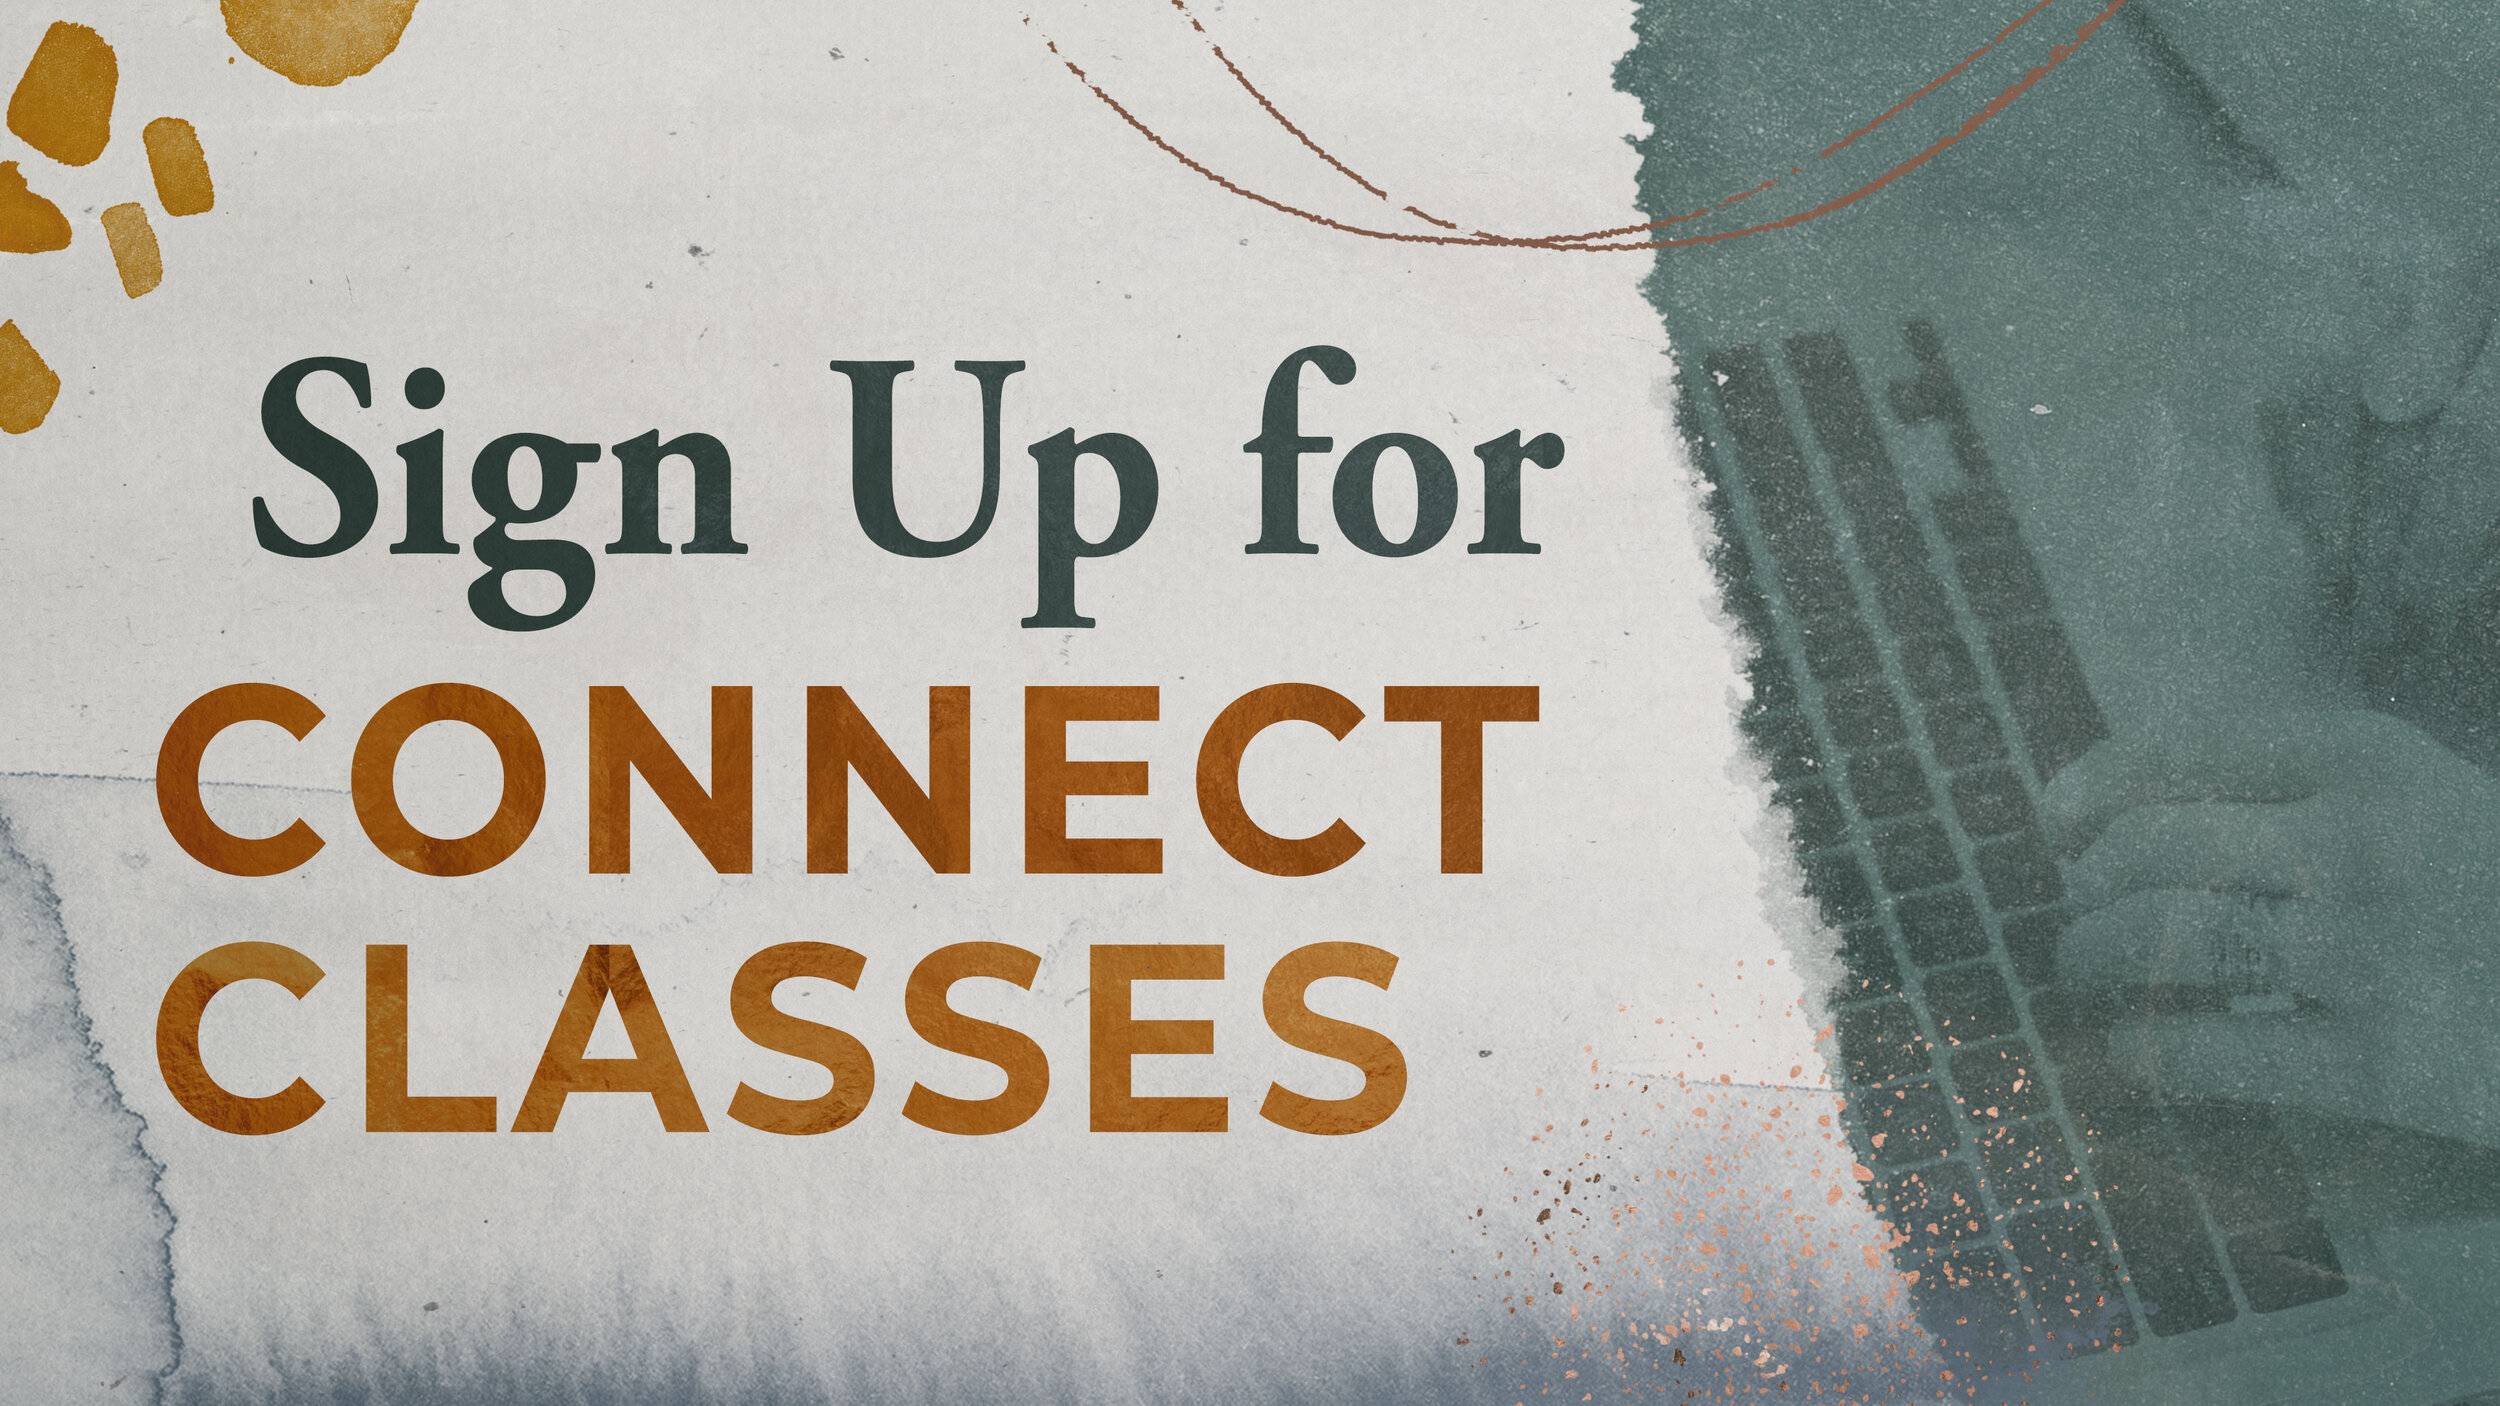 Sign Up for Connect Classes